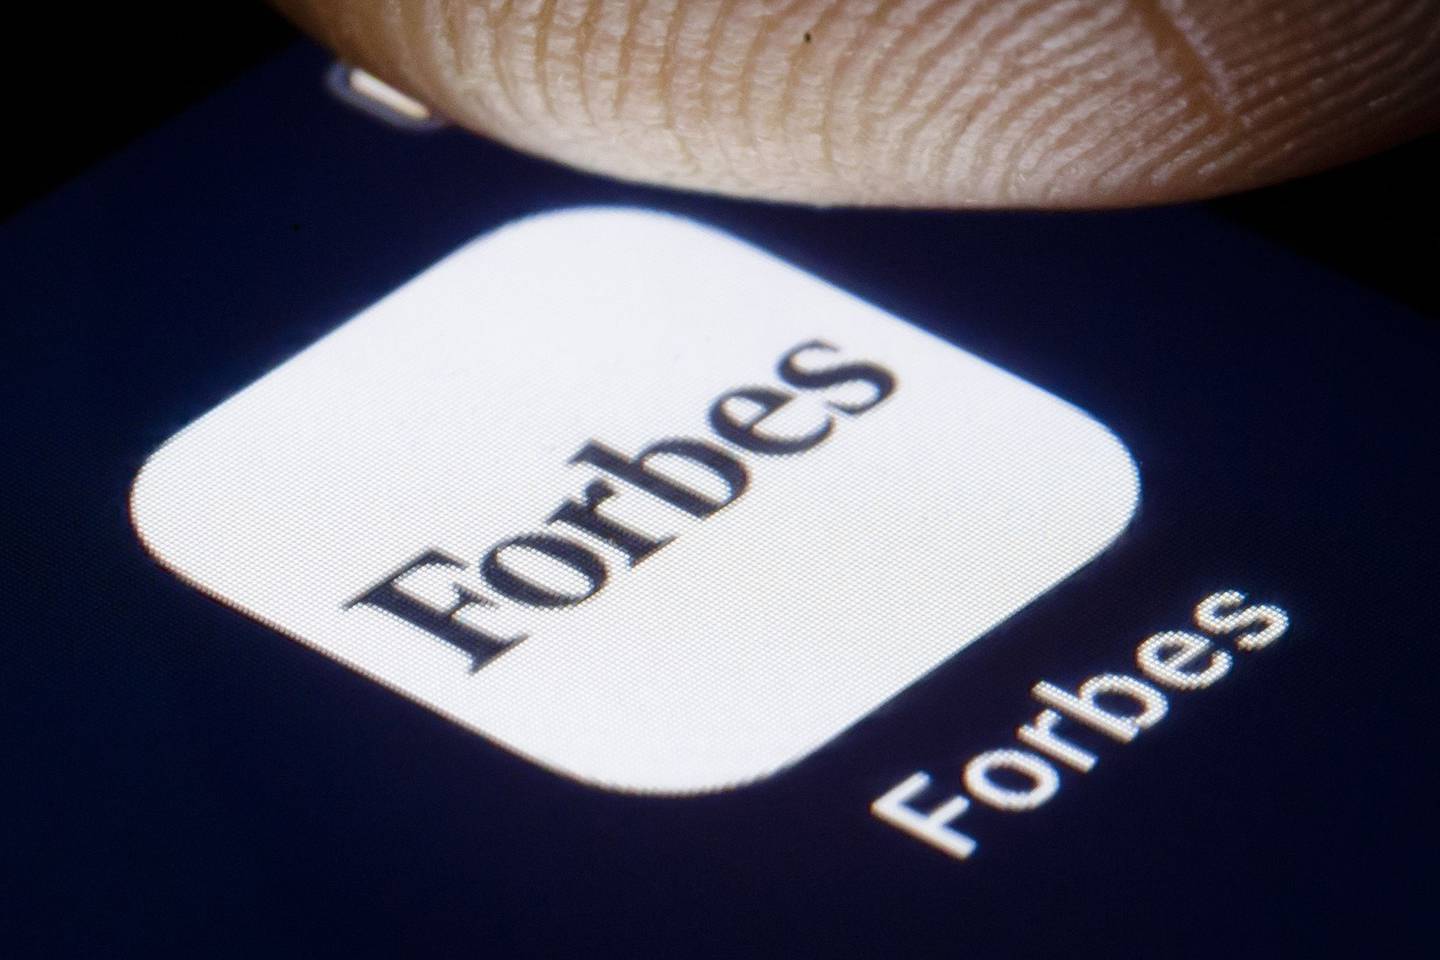 The logo of the US business magazine Forbes is displayed on a smartphone Photographer: Thomas Trutschel/Photothek/Getty Imagesdfd